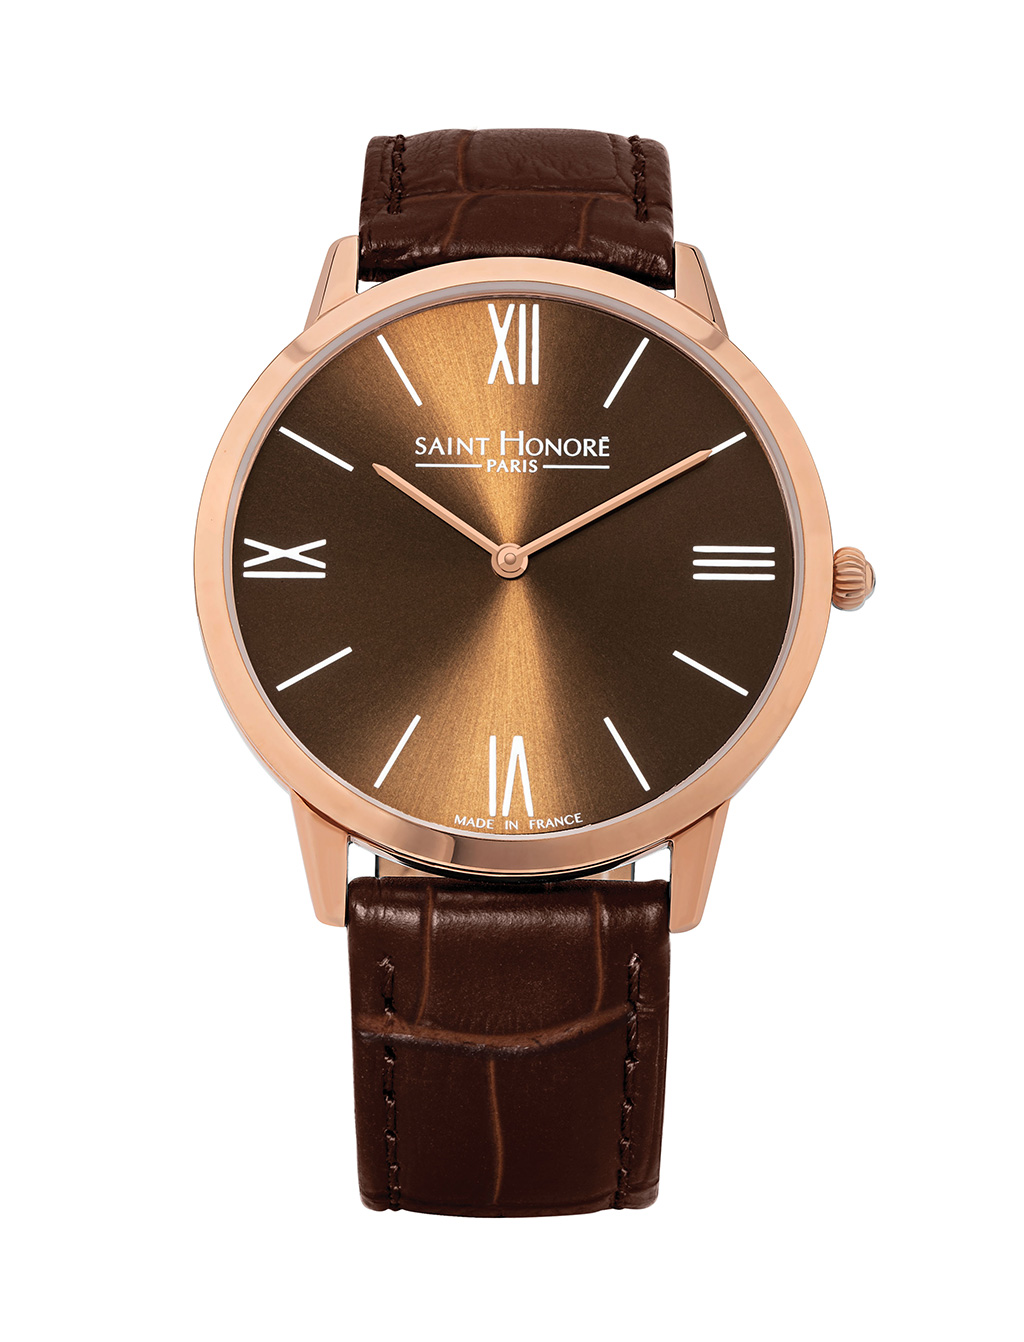 WAGRAM Men's watch - Stainless steel case, brown leather strap